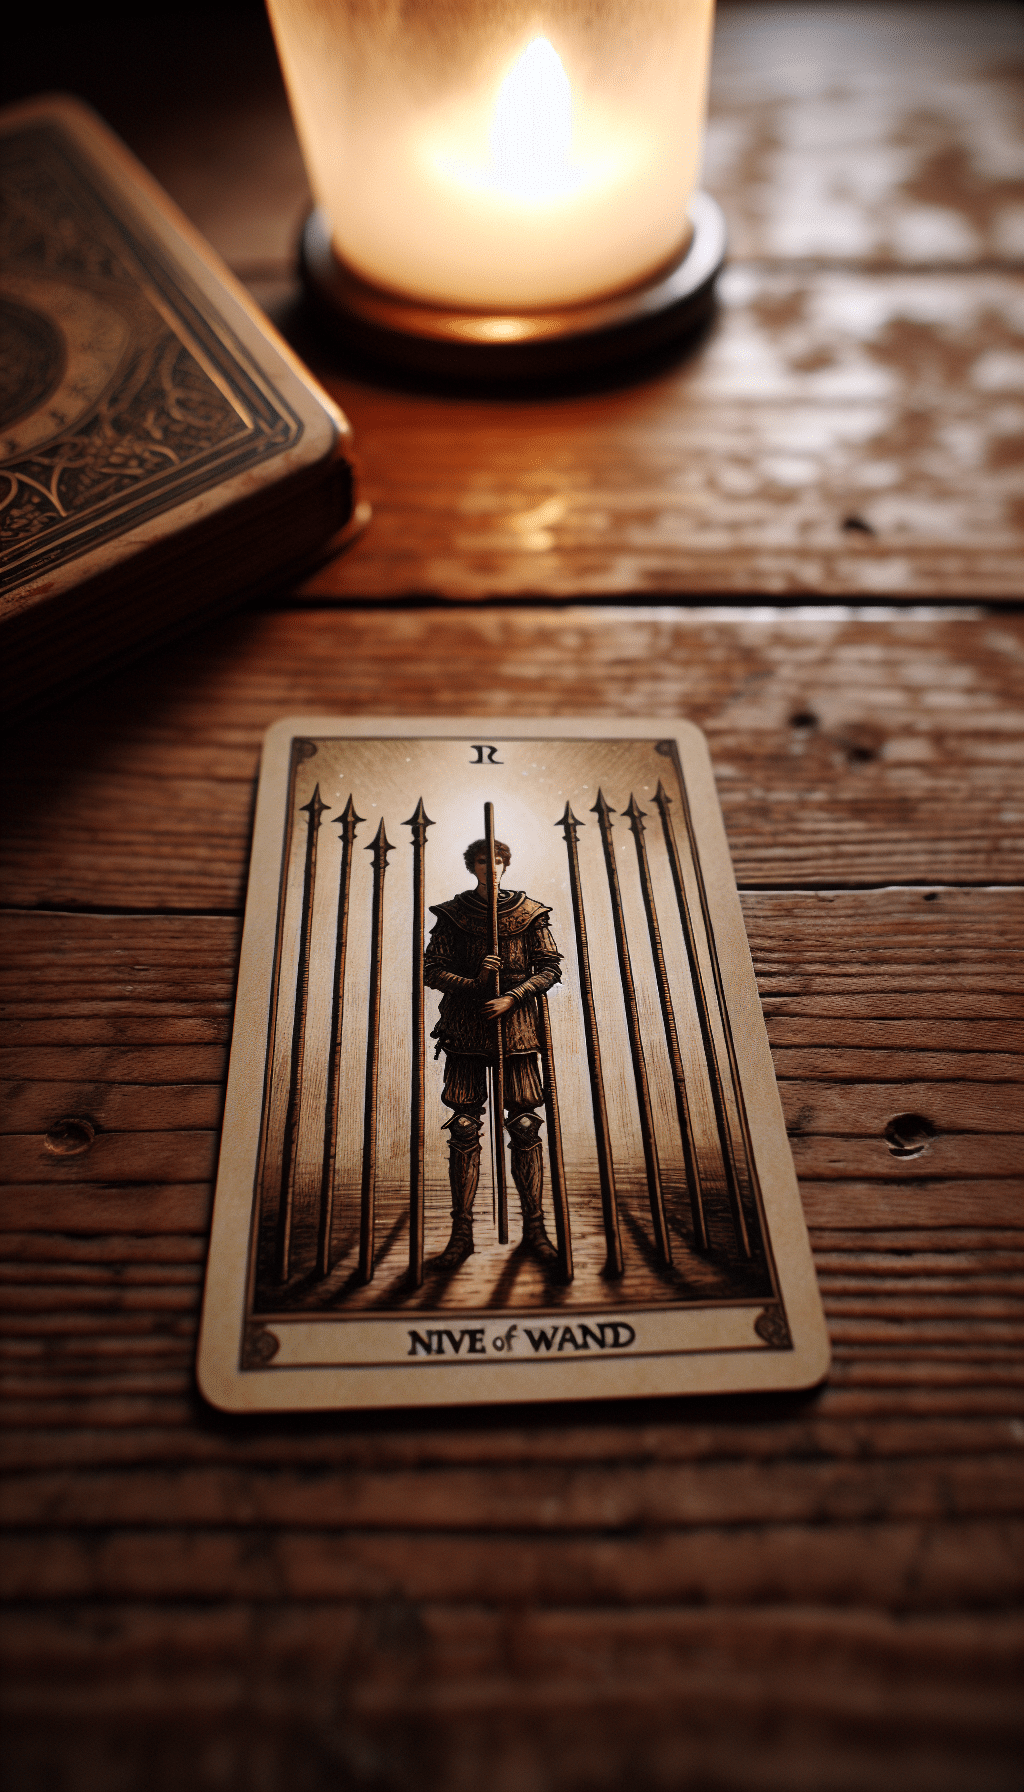 The Resilient Warrior: Exploring the Nine of Wands Tarot Card in Decision Making